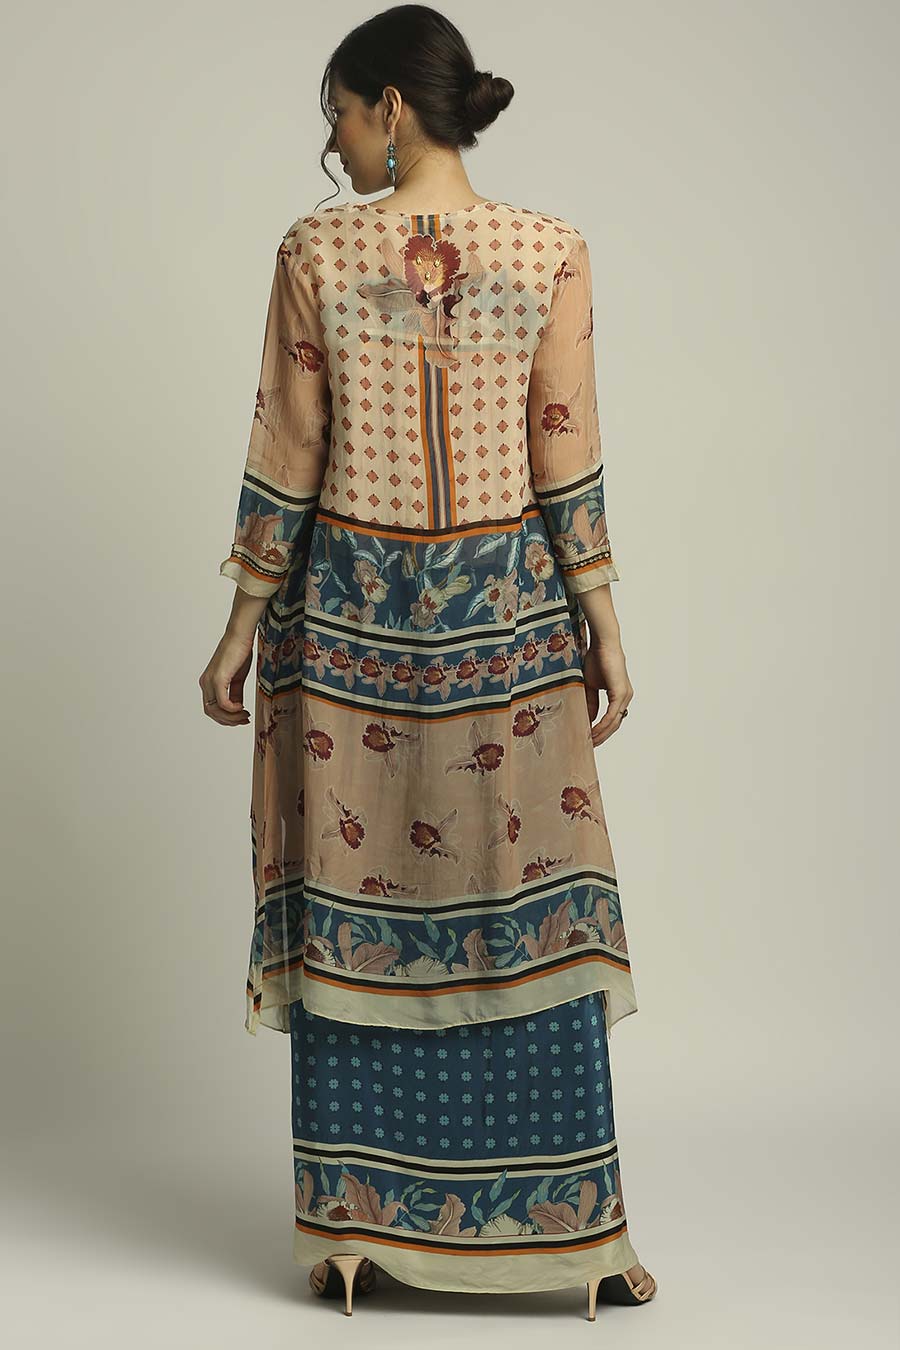 Peach & Blue Printed Skirt Set With Jacket